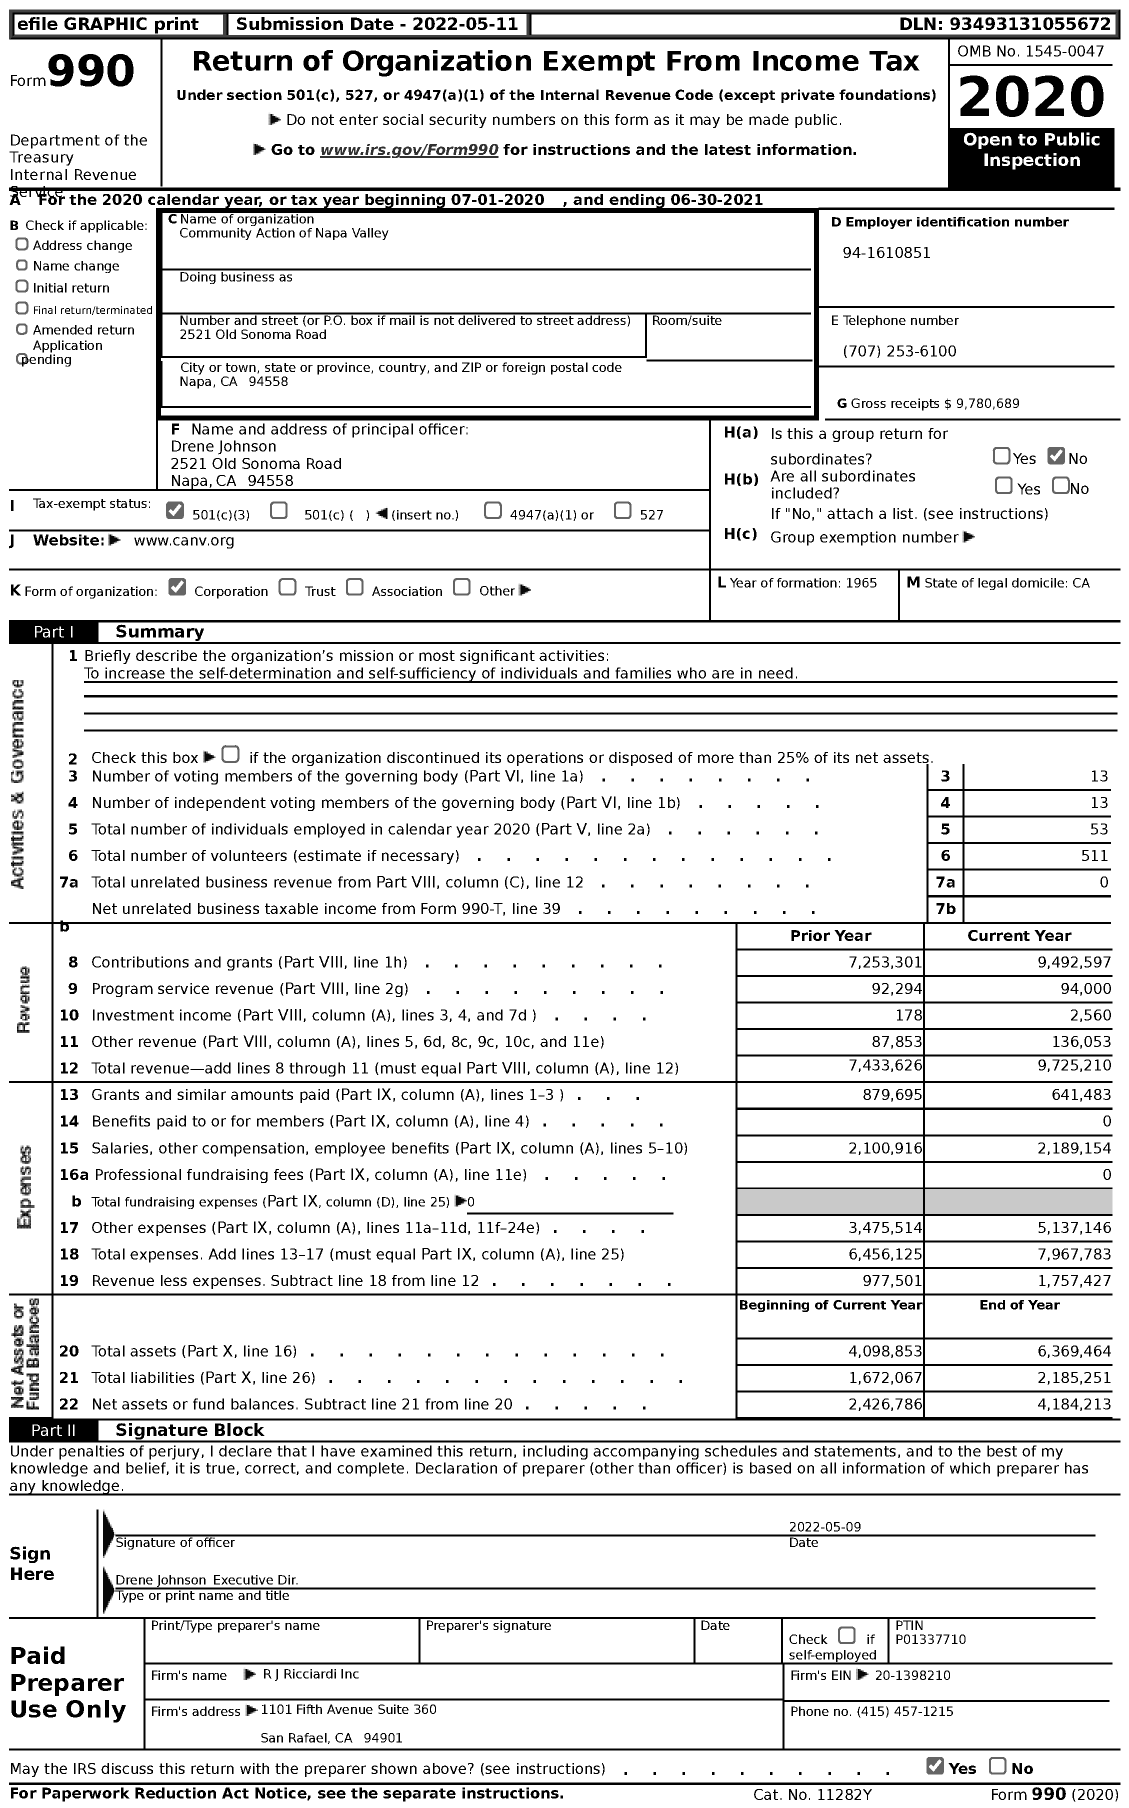 Image of first page of 2020 Form 990 for Community Action of Napa Valley (CANV)